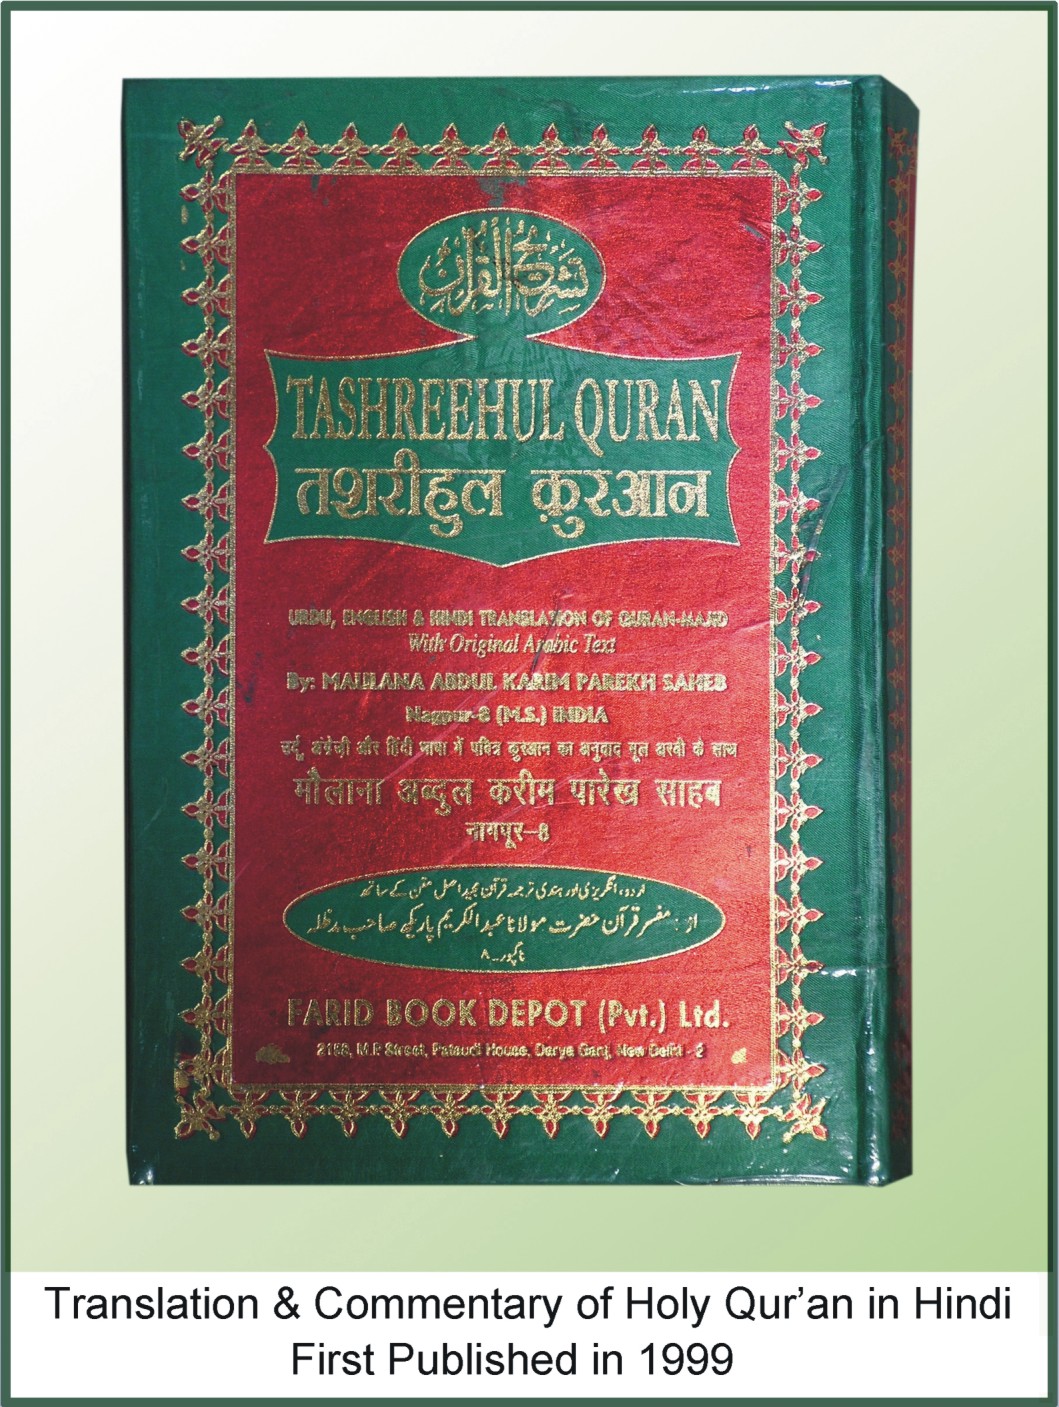 Translation & Commentary of The Holy Qur'an (Hindi) First Published in 1999